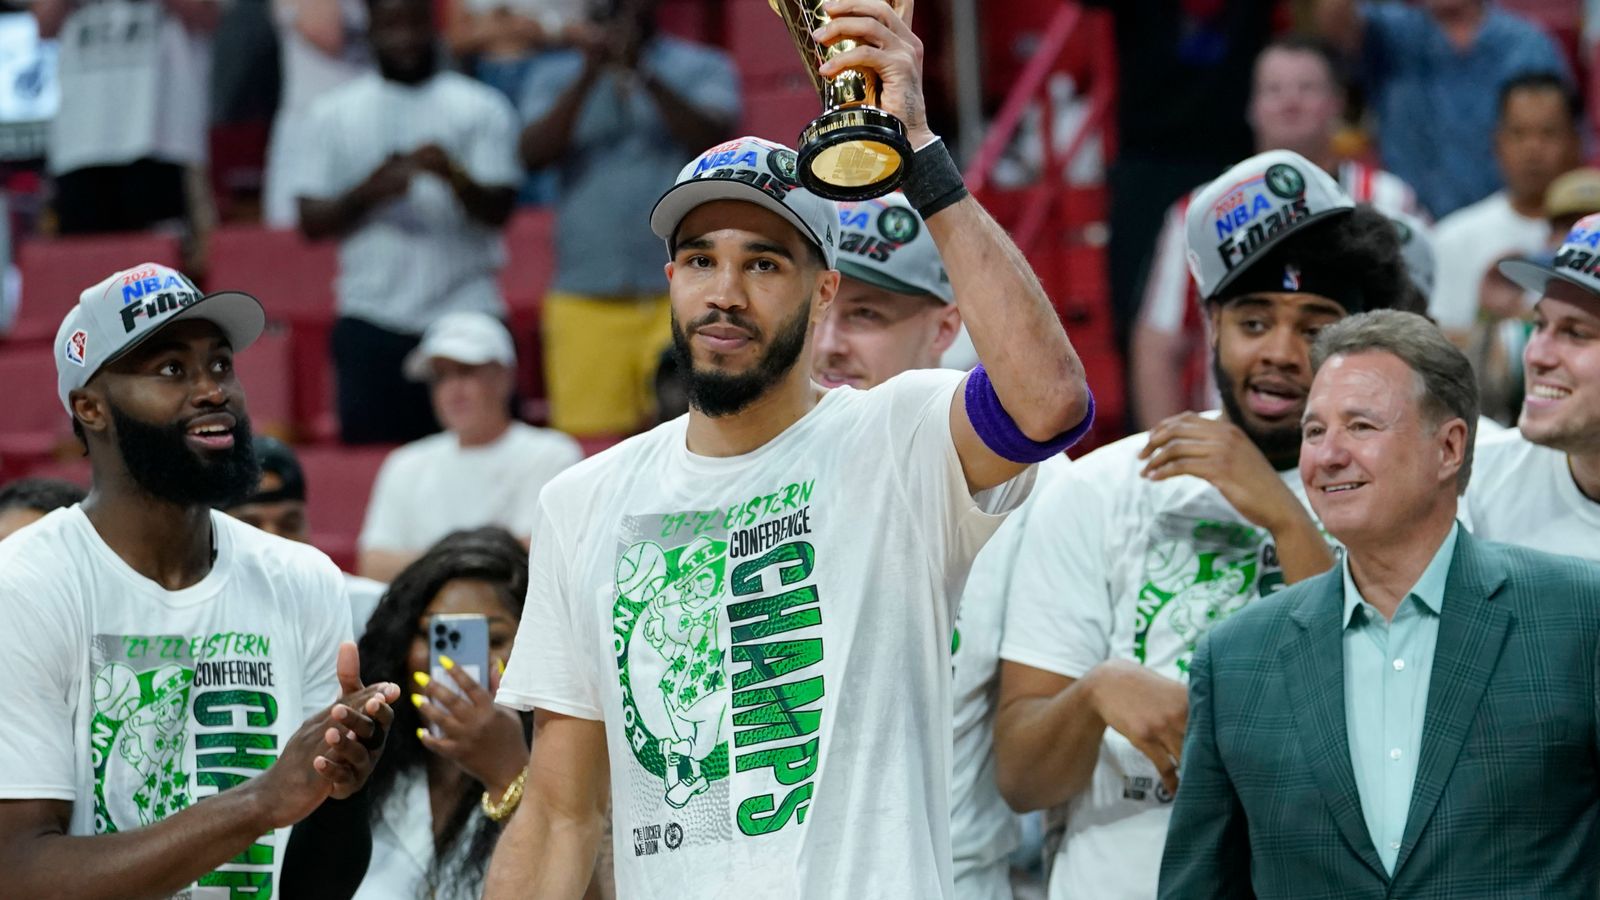 ClutchPoints on X: Jayson Tatum is the winner of the 2023 Kobe Bryant All- Star Game MVP 🏆 🌟 55 points (NBA ASG record) 🌟 10 rebounds 🌟 6 assists  🌟 22-of-31 FG 🌟 10-of-18 3PT  / X